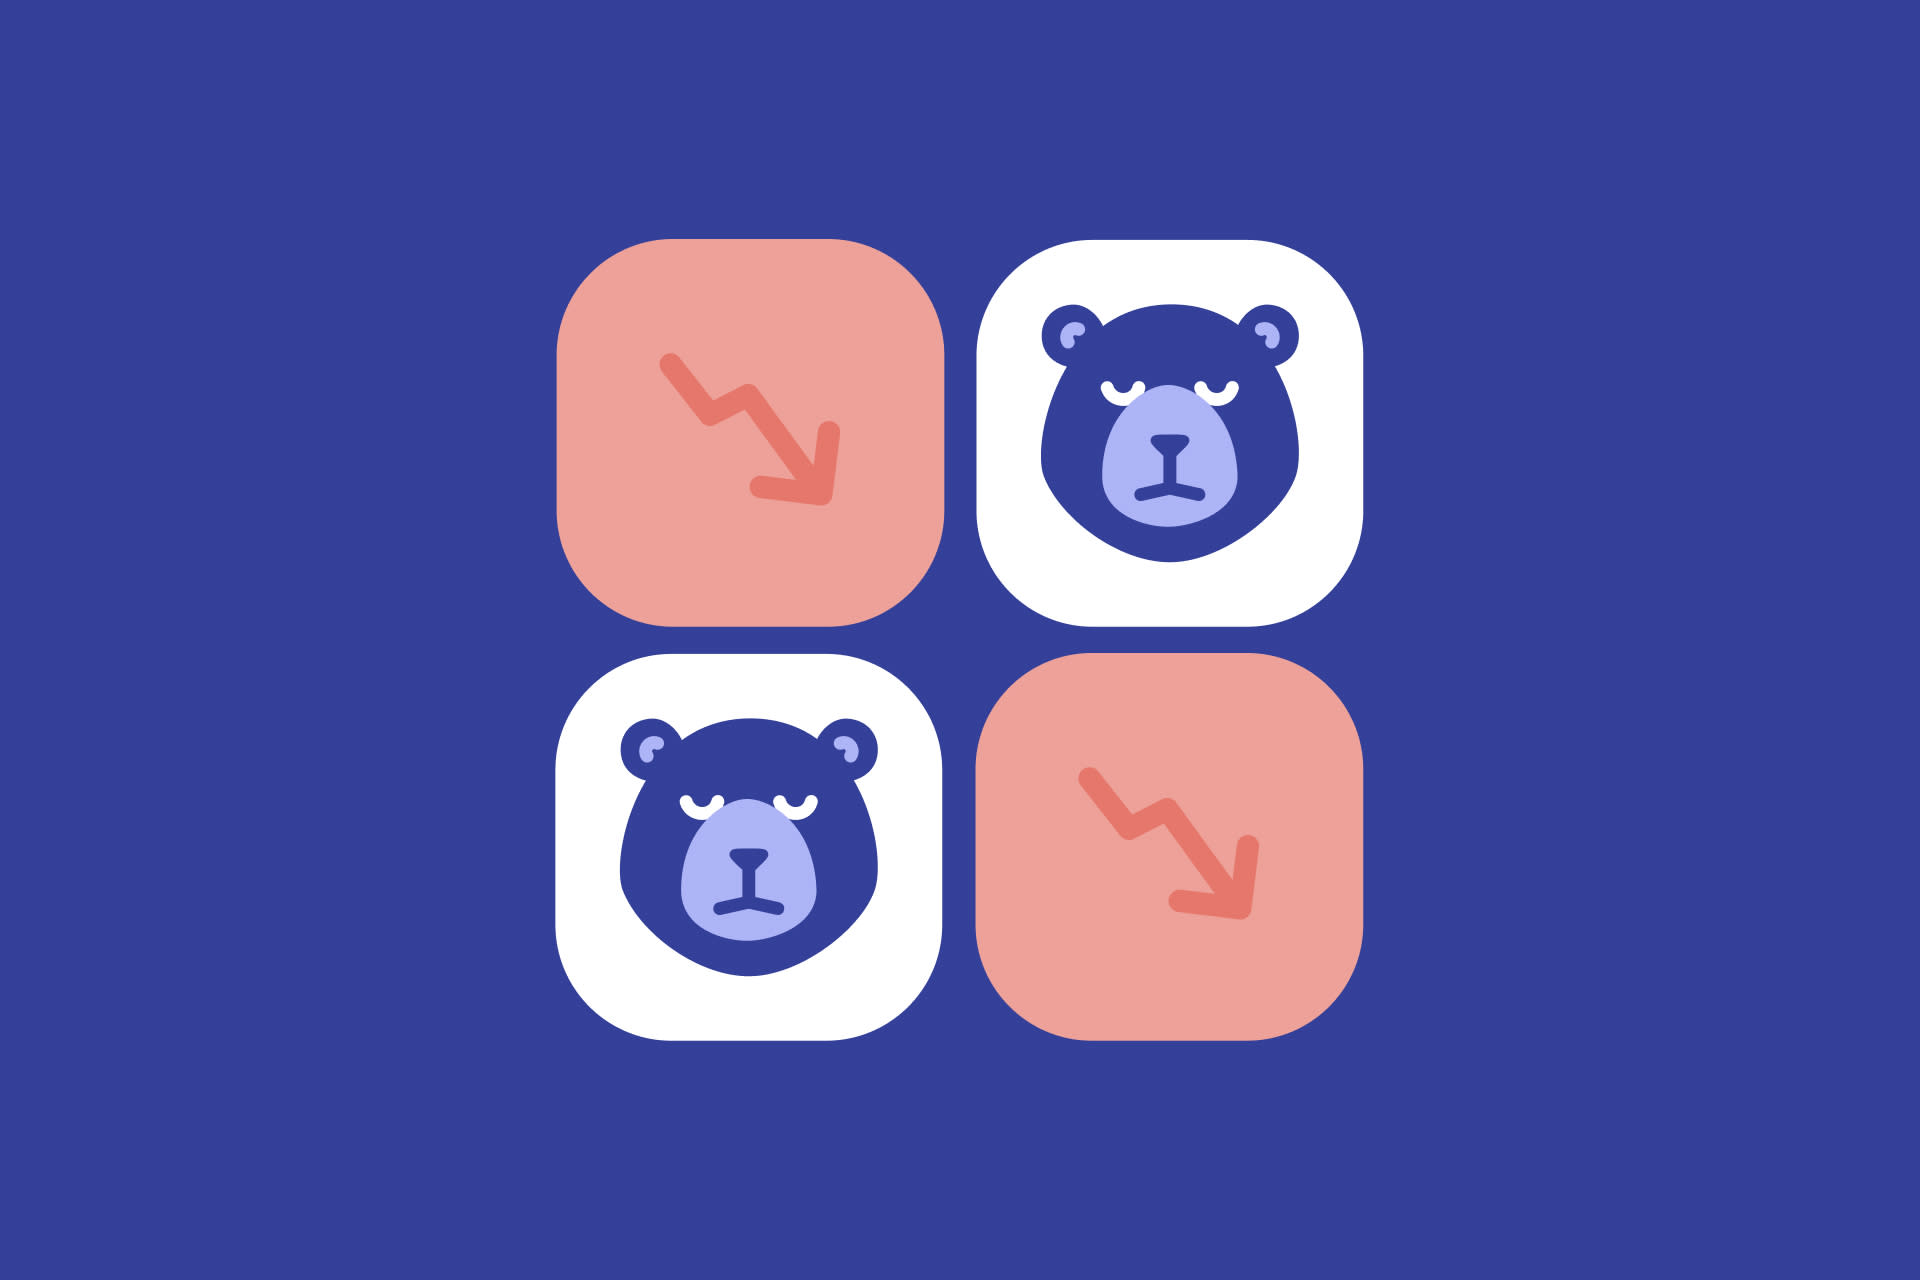 Bear market design with four purple bears and four red arrows in boxes, signifying drop in stock market